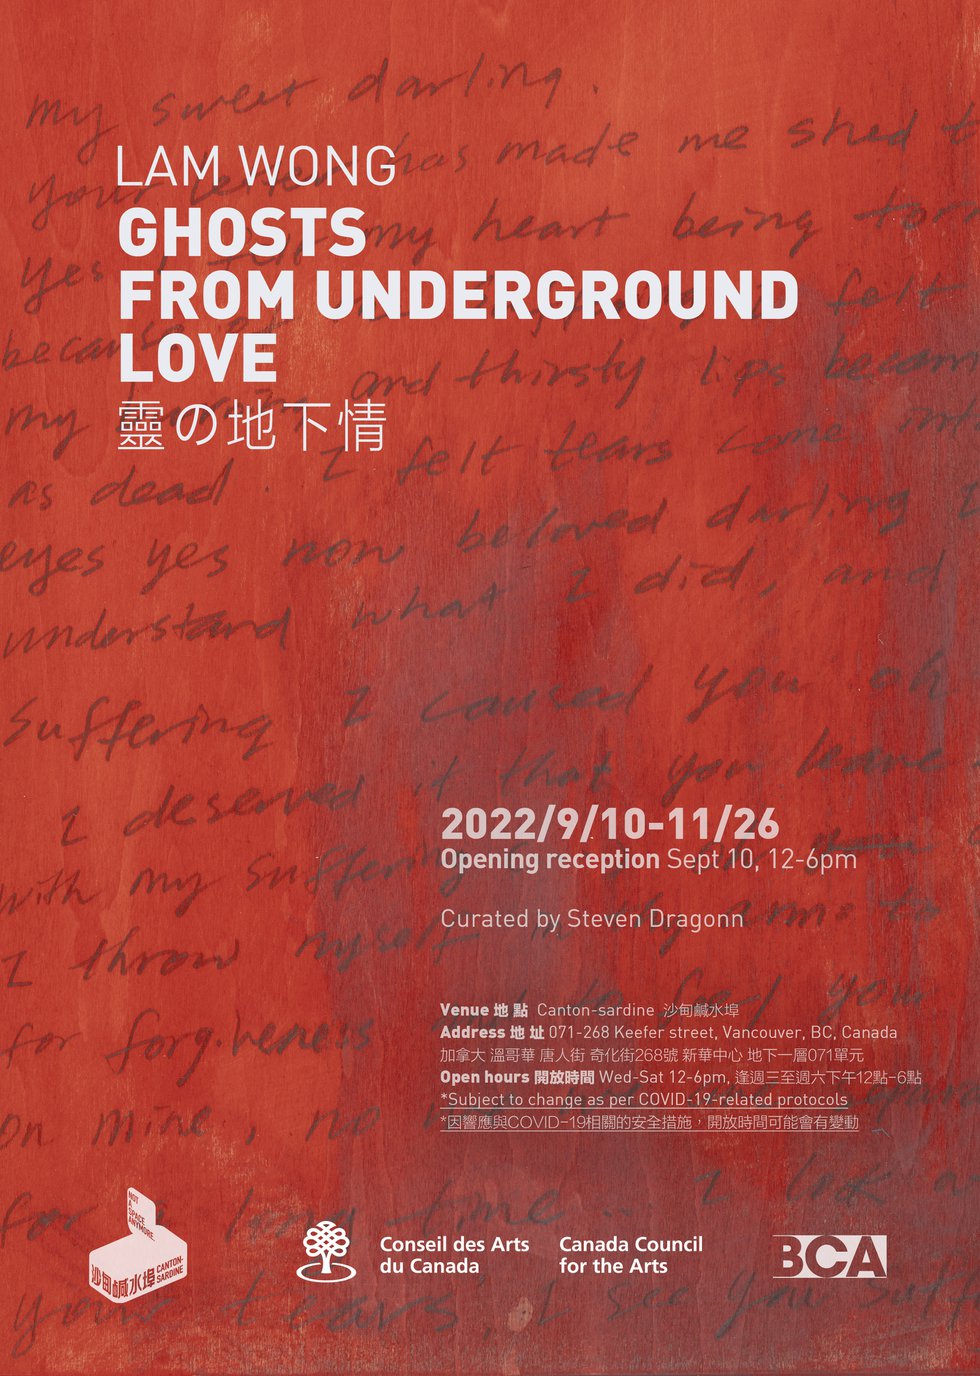 Lam Wong, "Ghosts from Underground Love," 2022